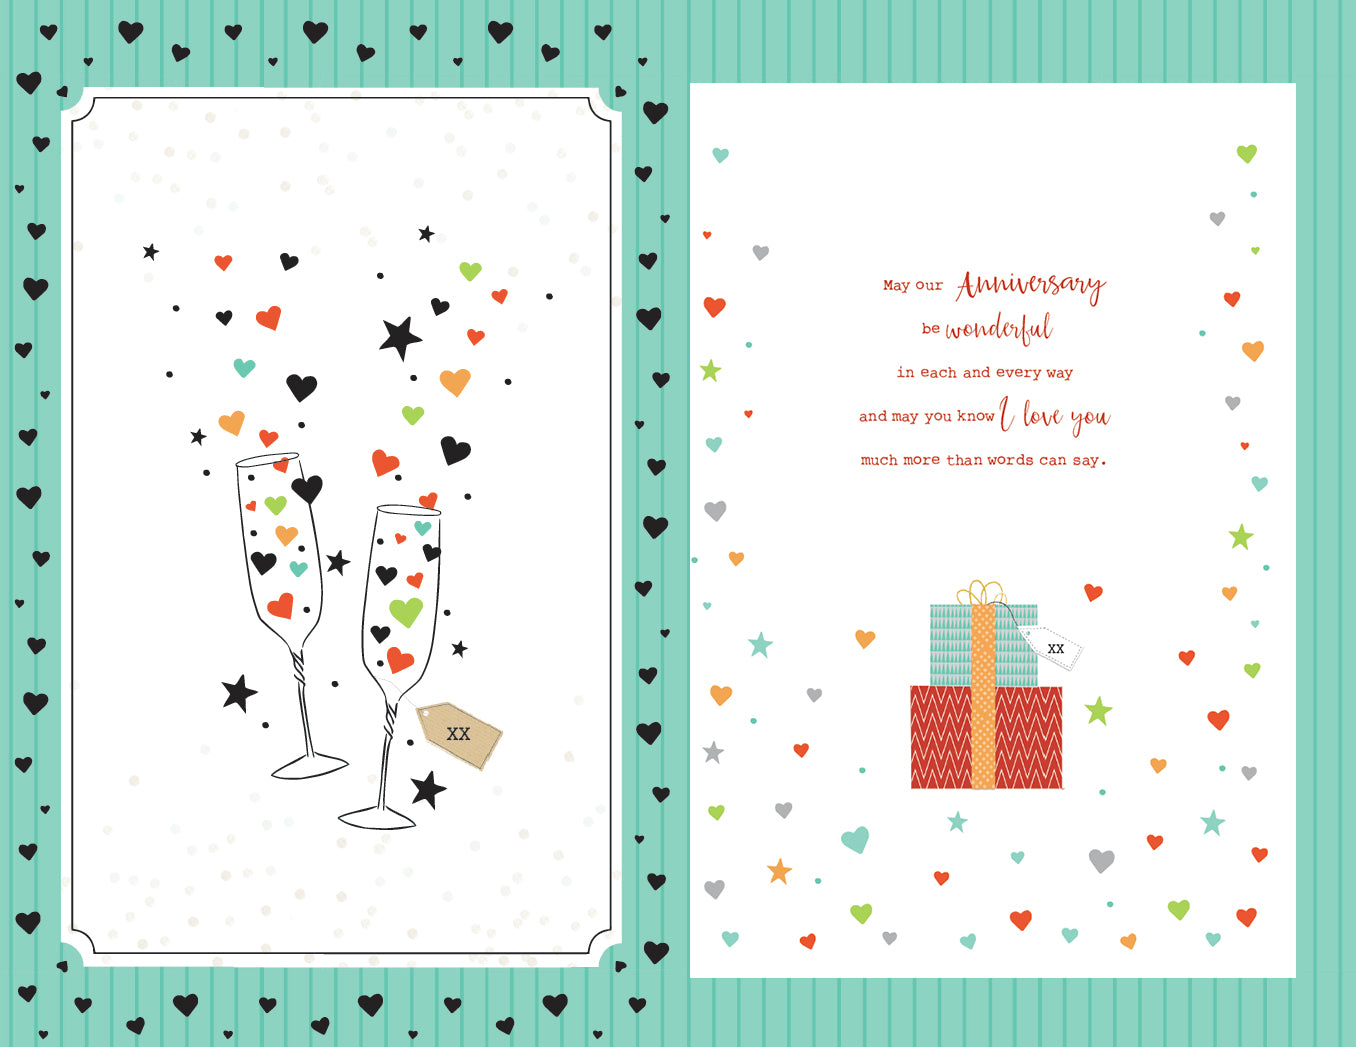 Large Husband Anniversary Card - Entwined Embellished Hearts